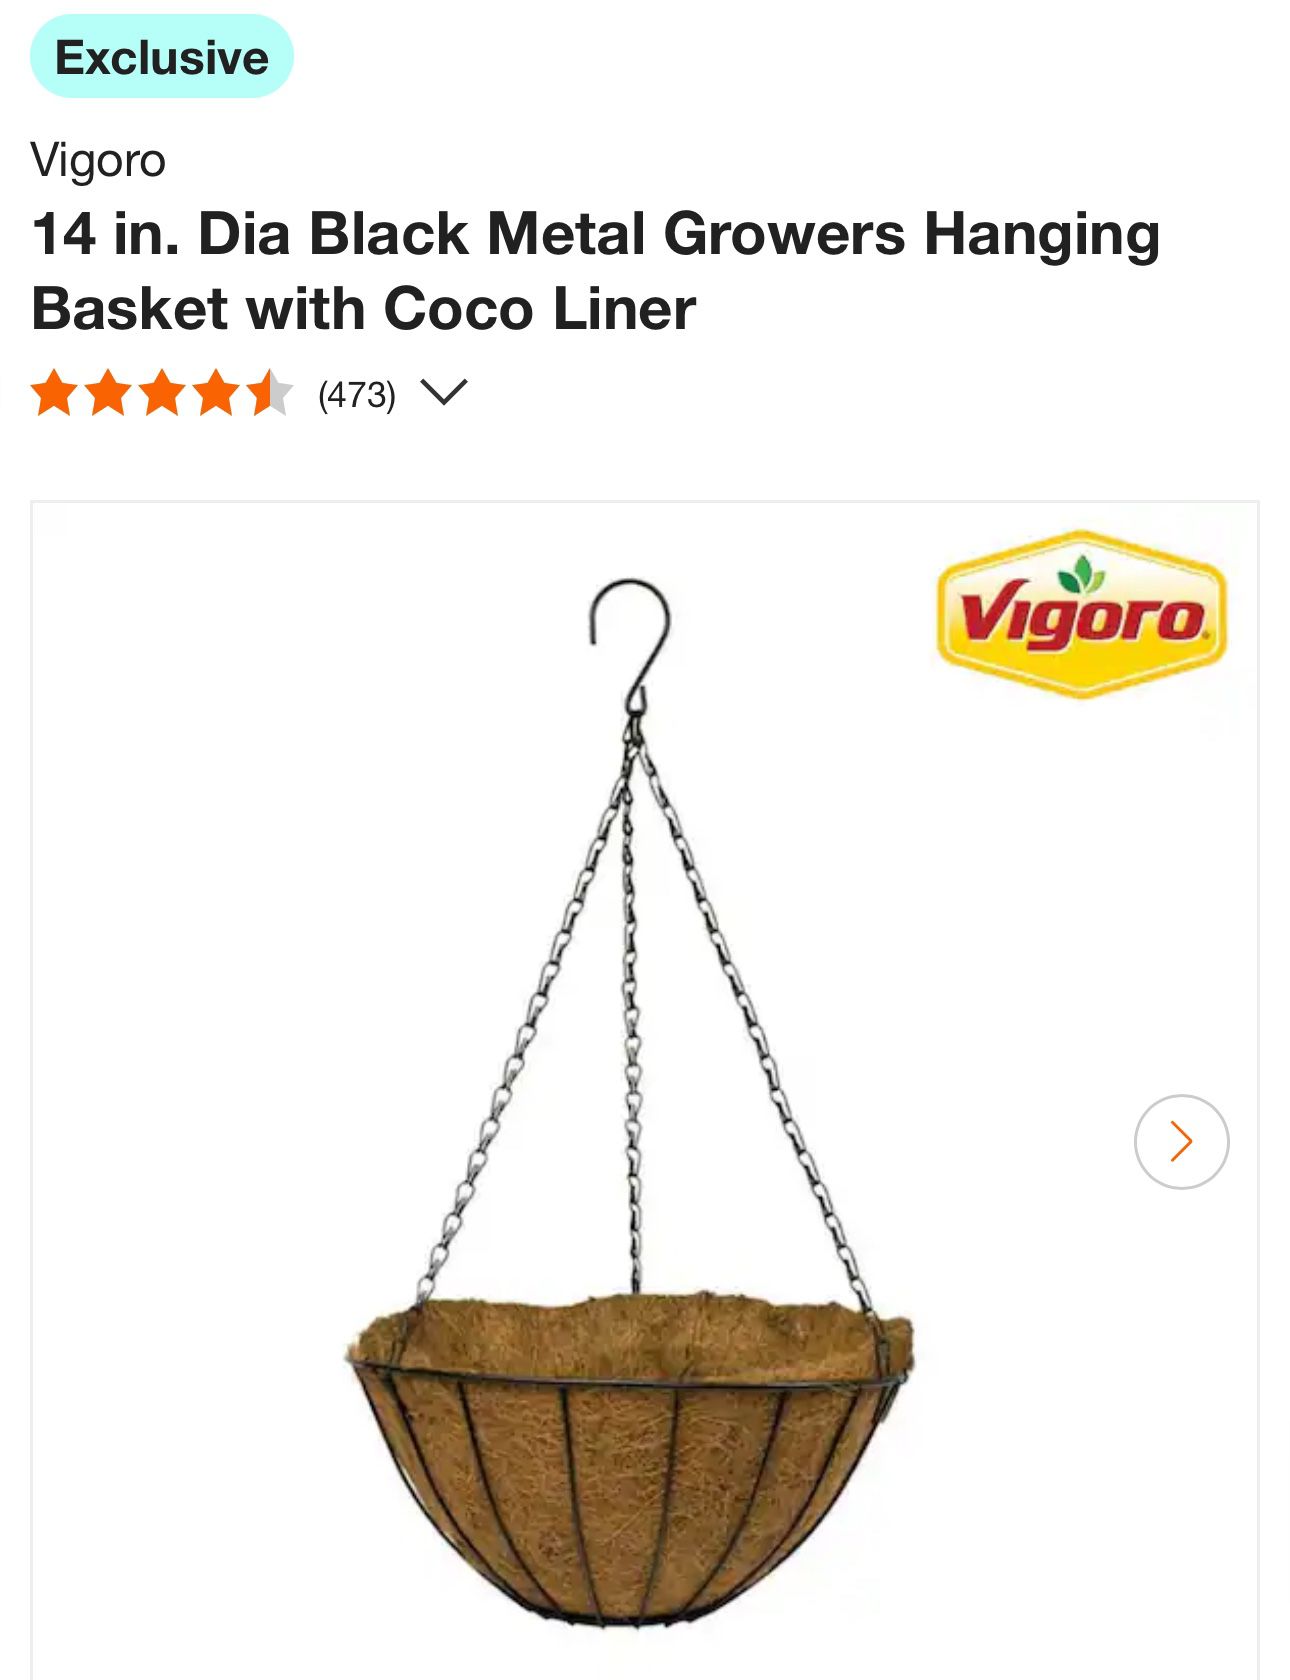 4 Of Vigoro 14 in. Dia Black Metal Growers Hanging Basket with Coco Liner